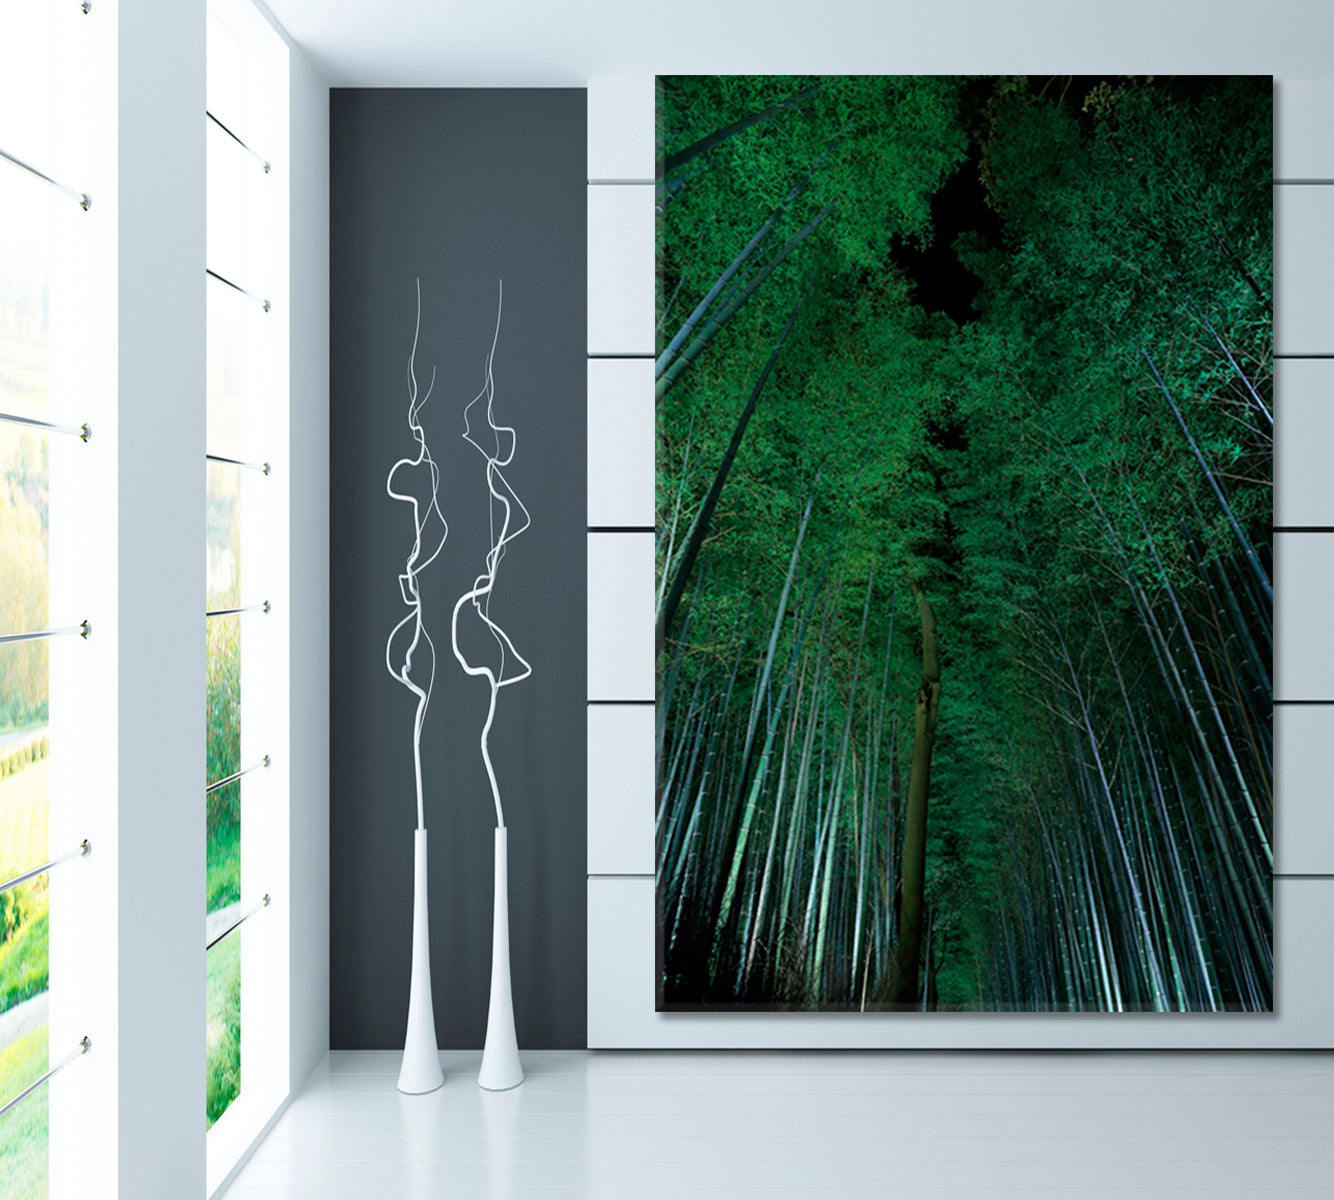 Bamboo Grove in Kyoto Exotic Forest Trees Canvas Print - Vertical Floral & Botanical Split Art Artesty   